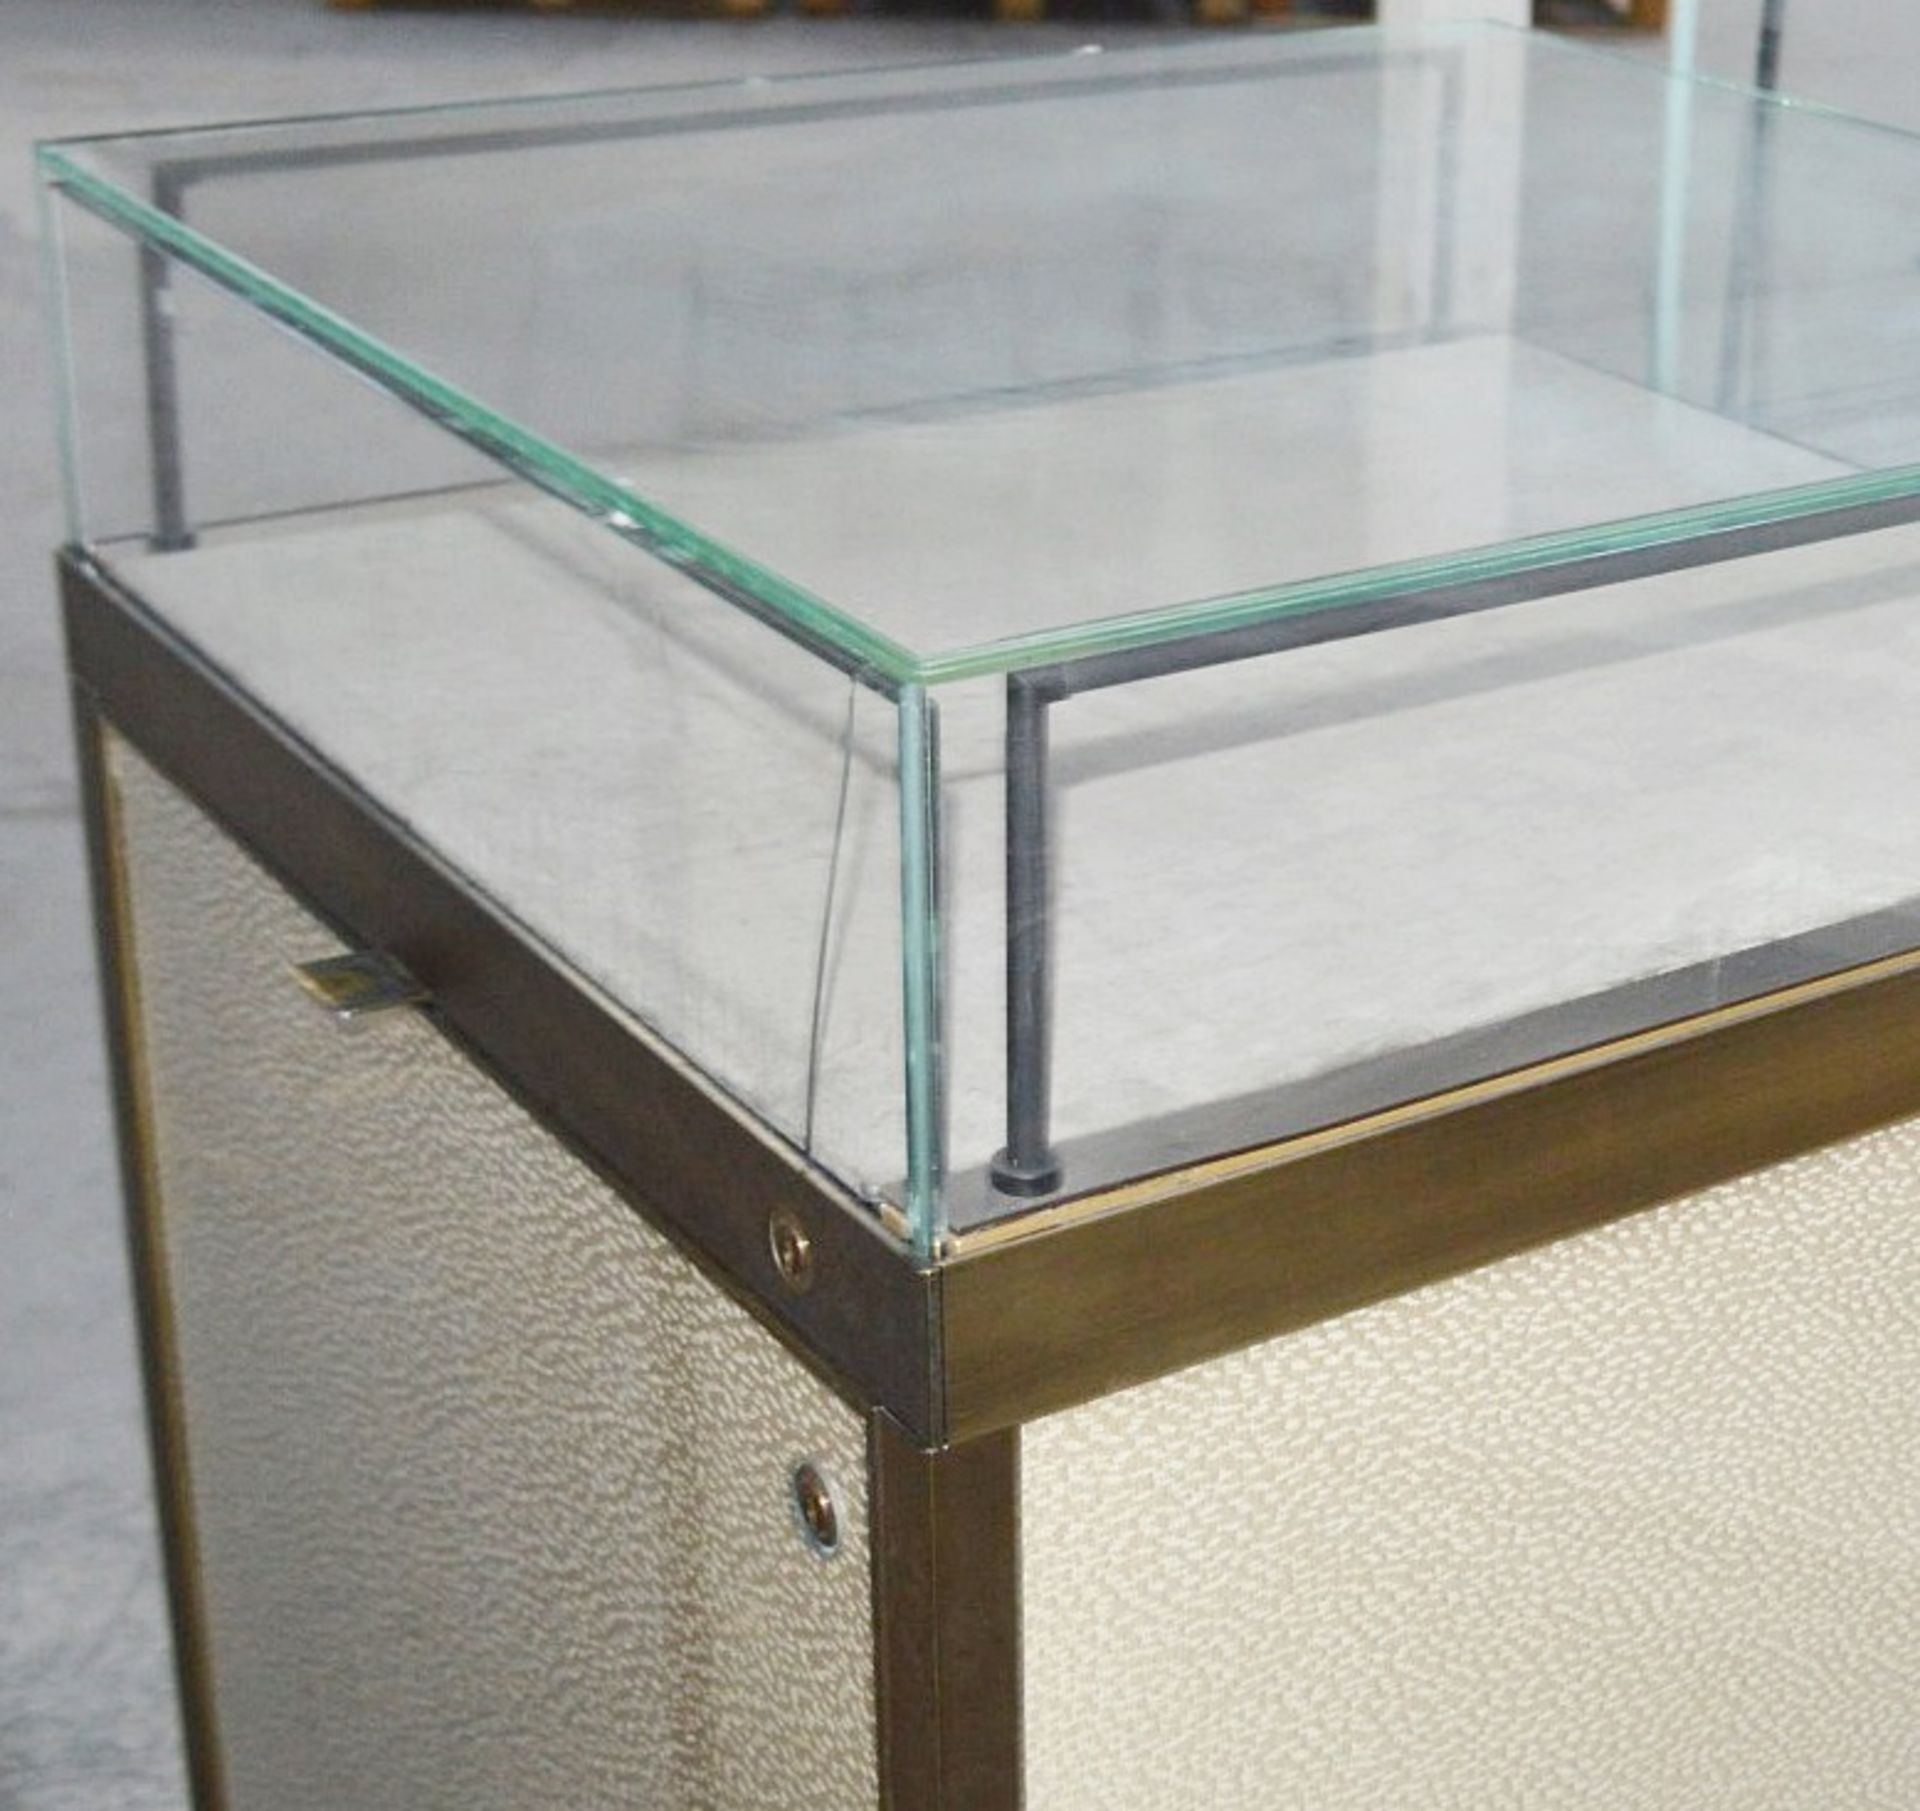 1 x Luxury Double Cabinet Glass Display Case - Dimensions: H124 x W100 x D65cm - Ex-Showroom Piece - Image 8 of 9